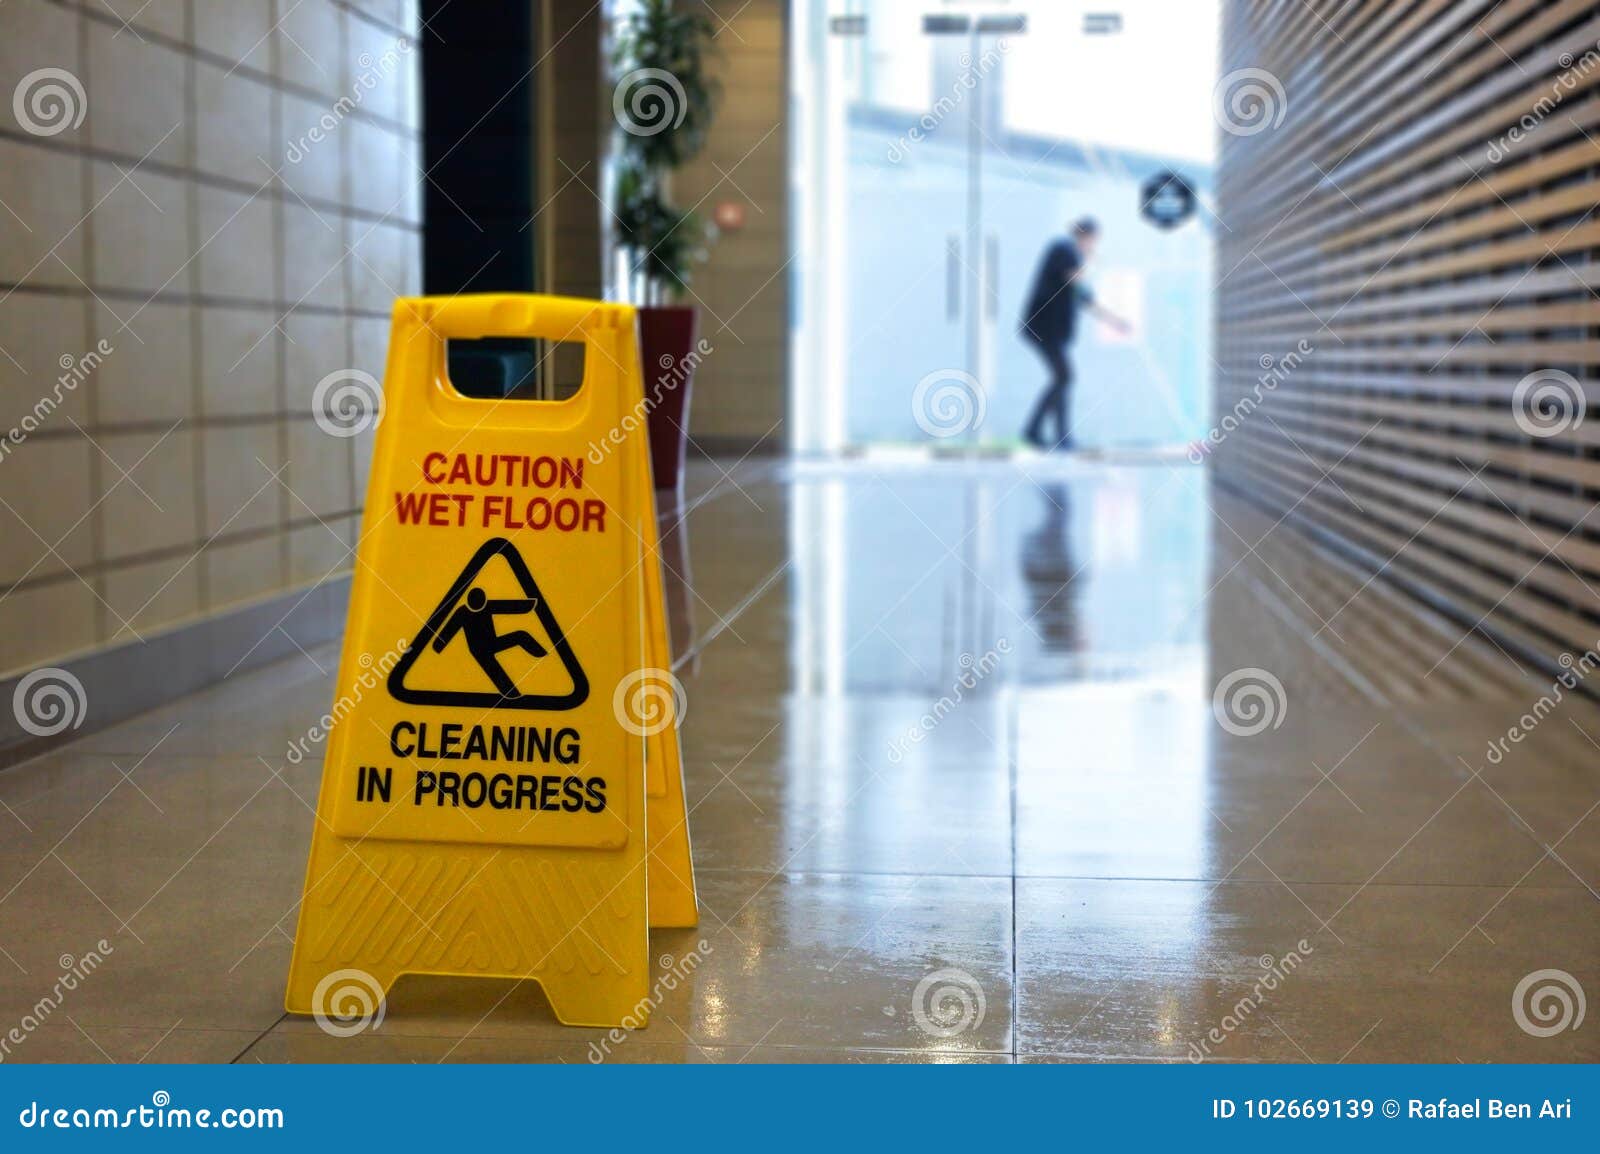 slippery floor surface warning sign and  on a wet floor